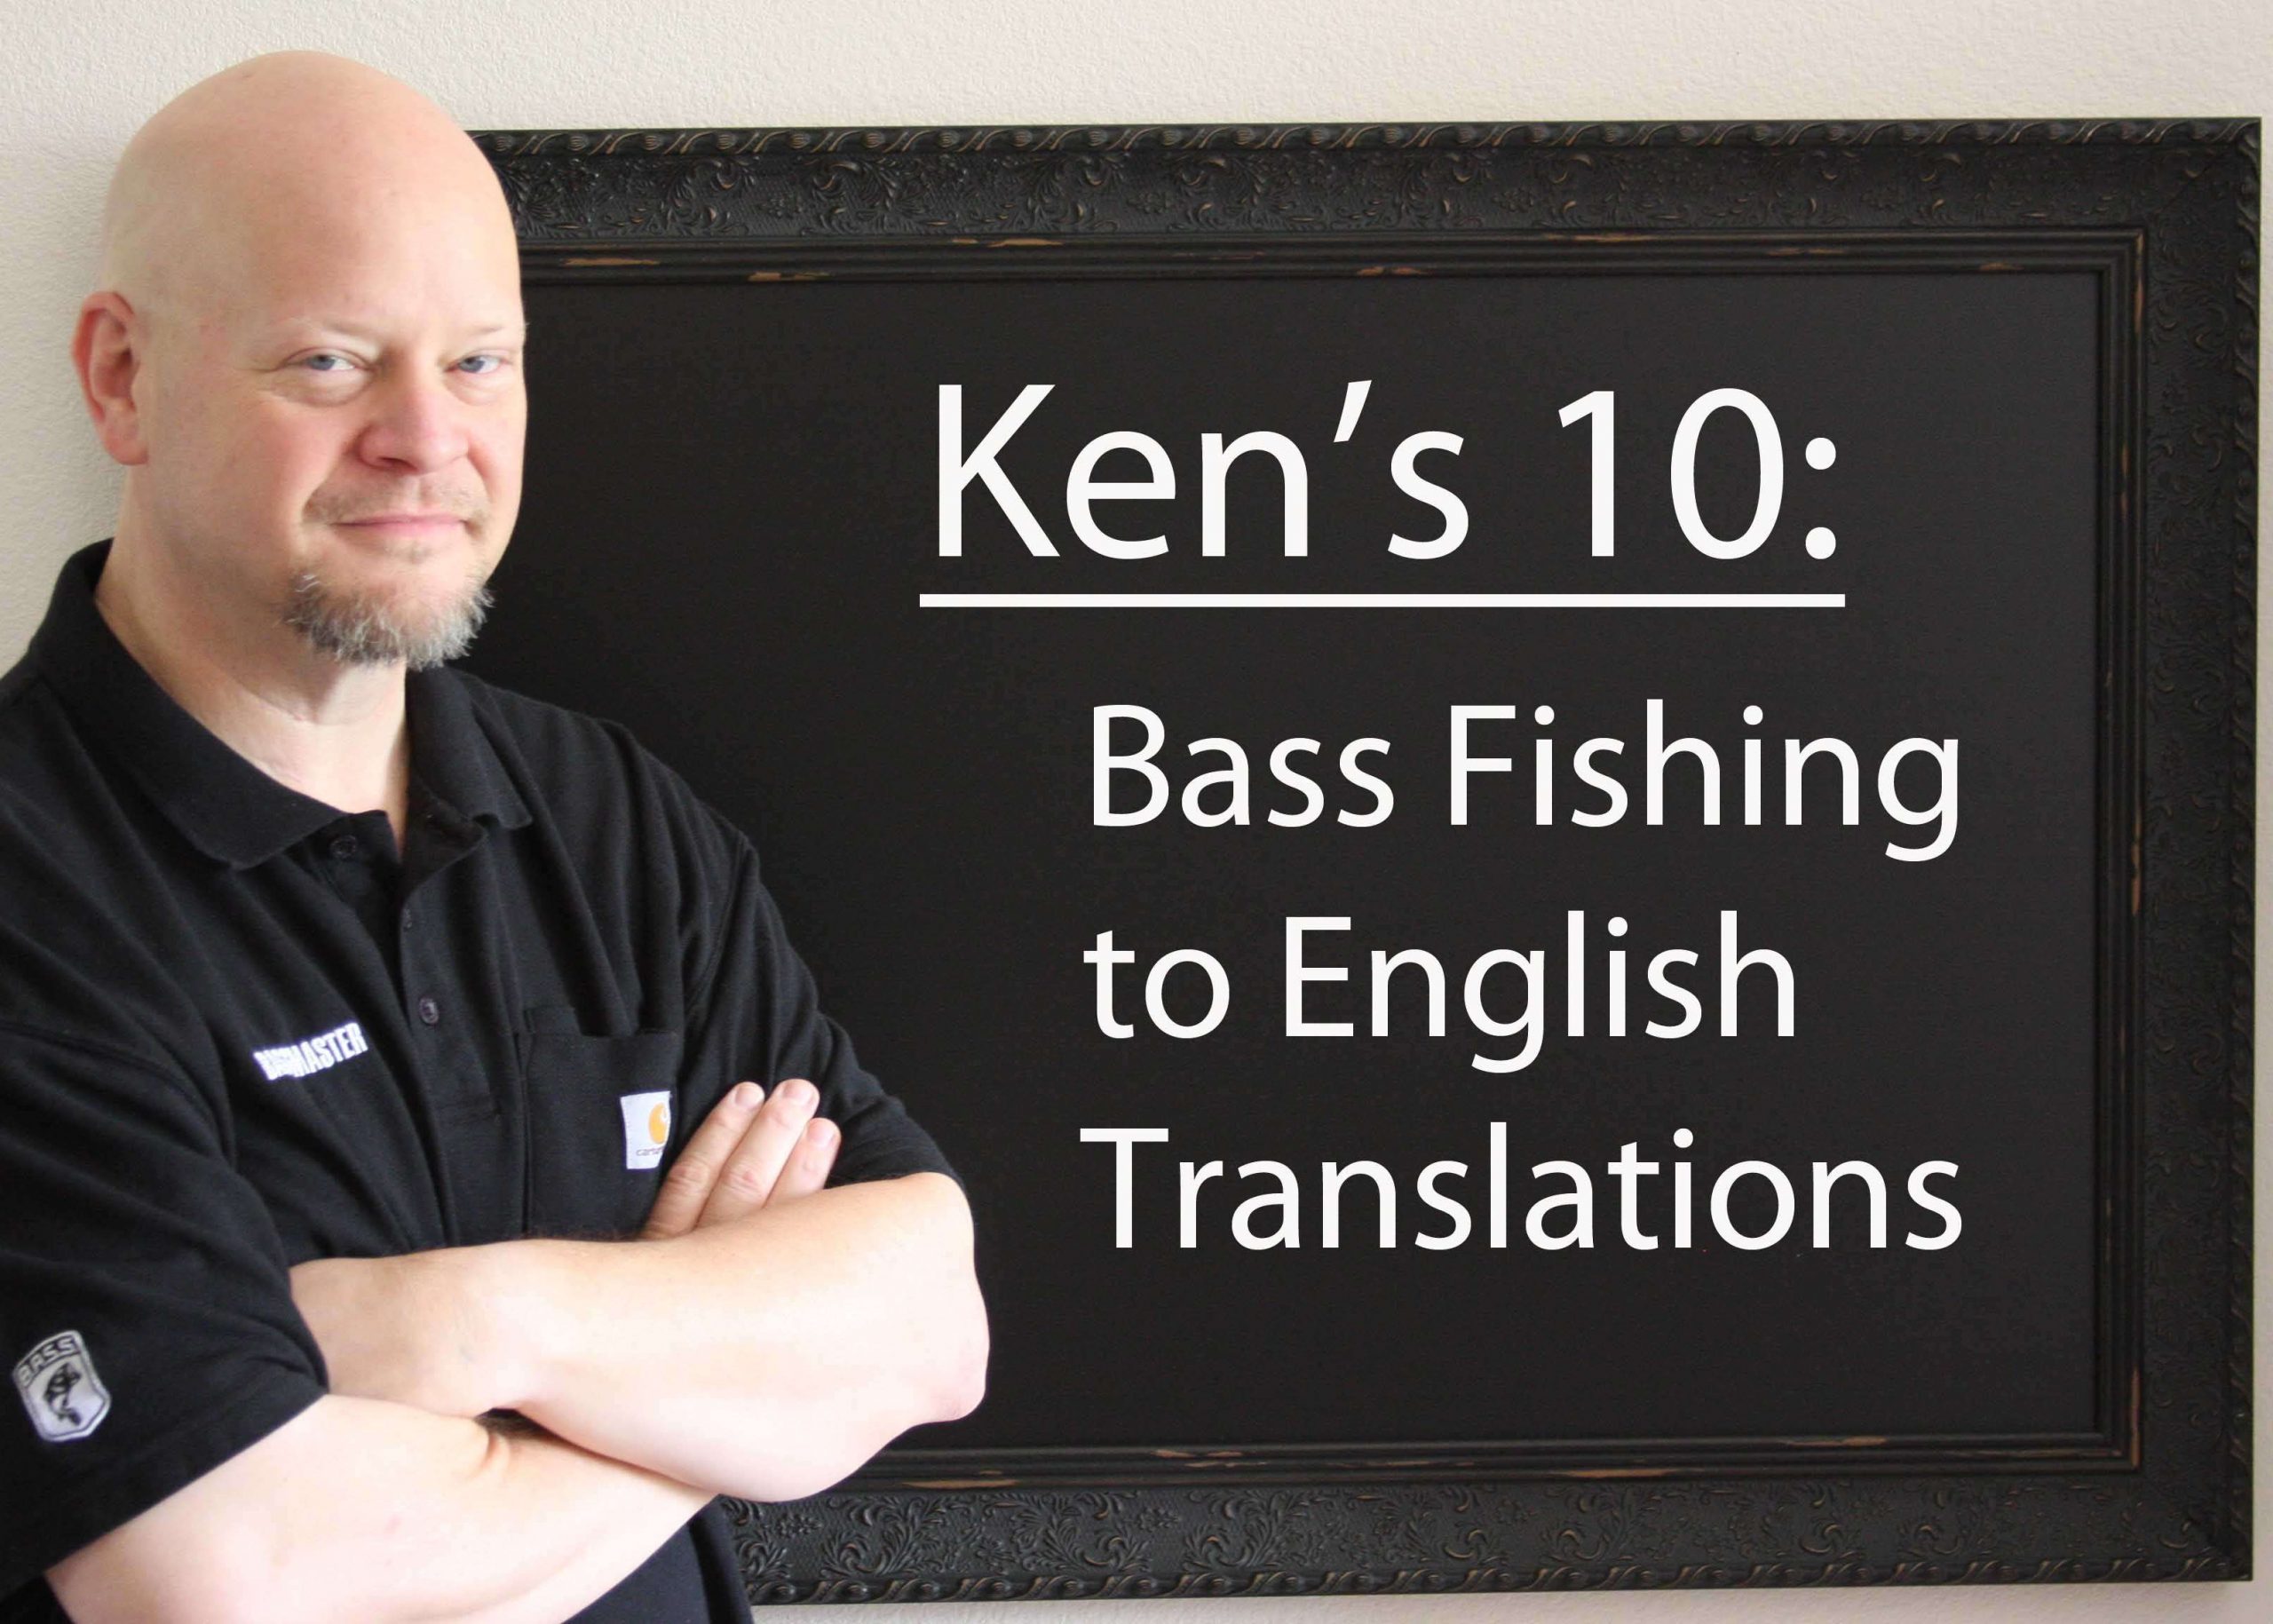 <p>If you're new to the sport, you're probably painfully aware that there's an awful lot of bass fishing jargon out there. Even when you think you know what anglers are talking about, there's lots of room for misinterpretation. Here are some common bass fishing phrases and what they really mean ... in plain English.</p>
